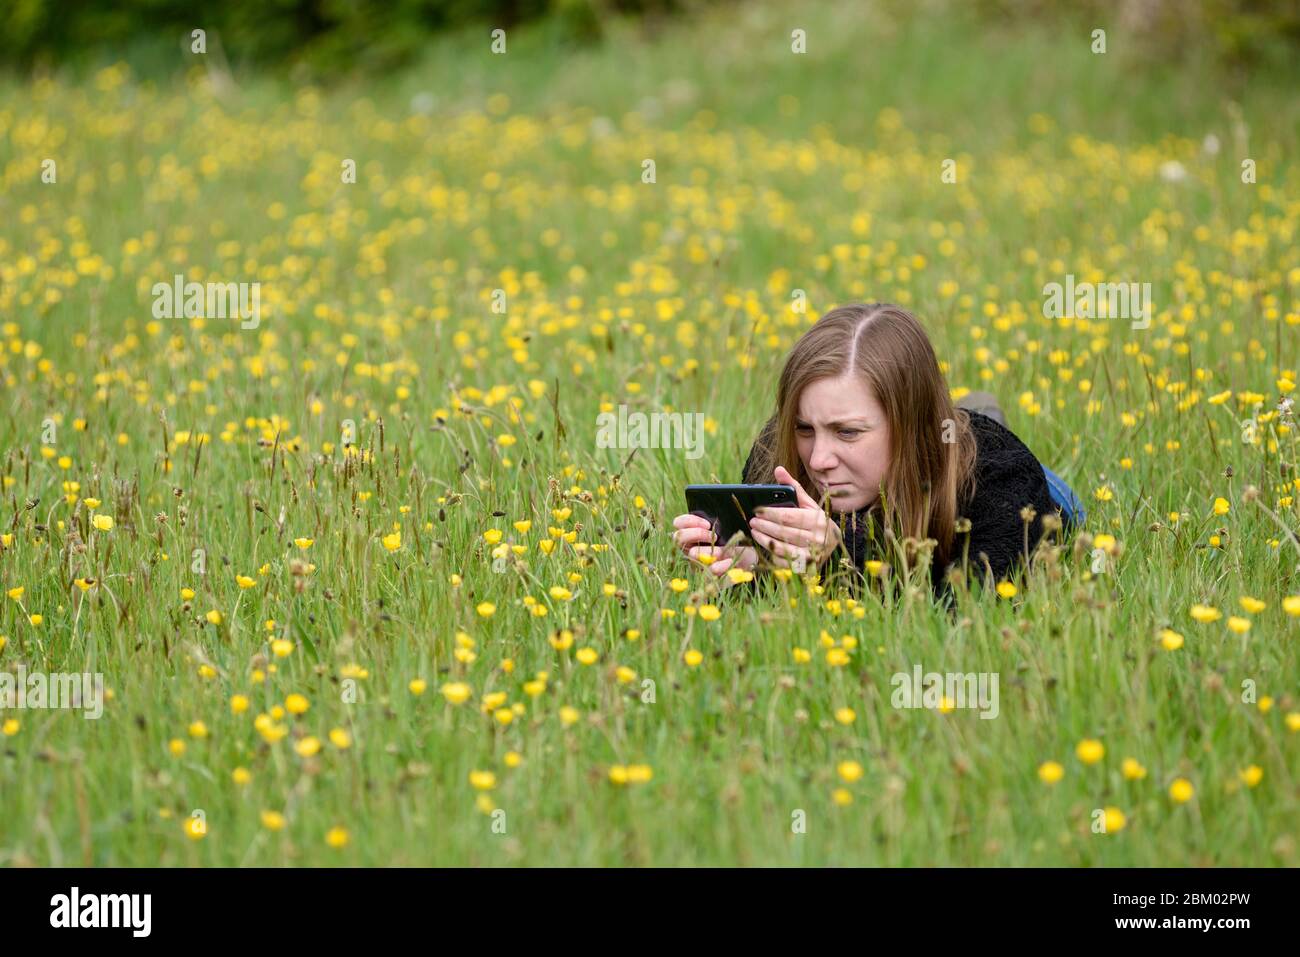 Young Women taking pictures with a mobile phone in a wildflower field in springtime. Stock Photo